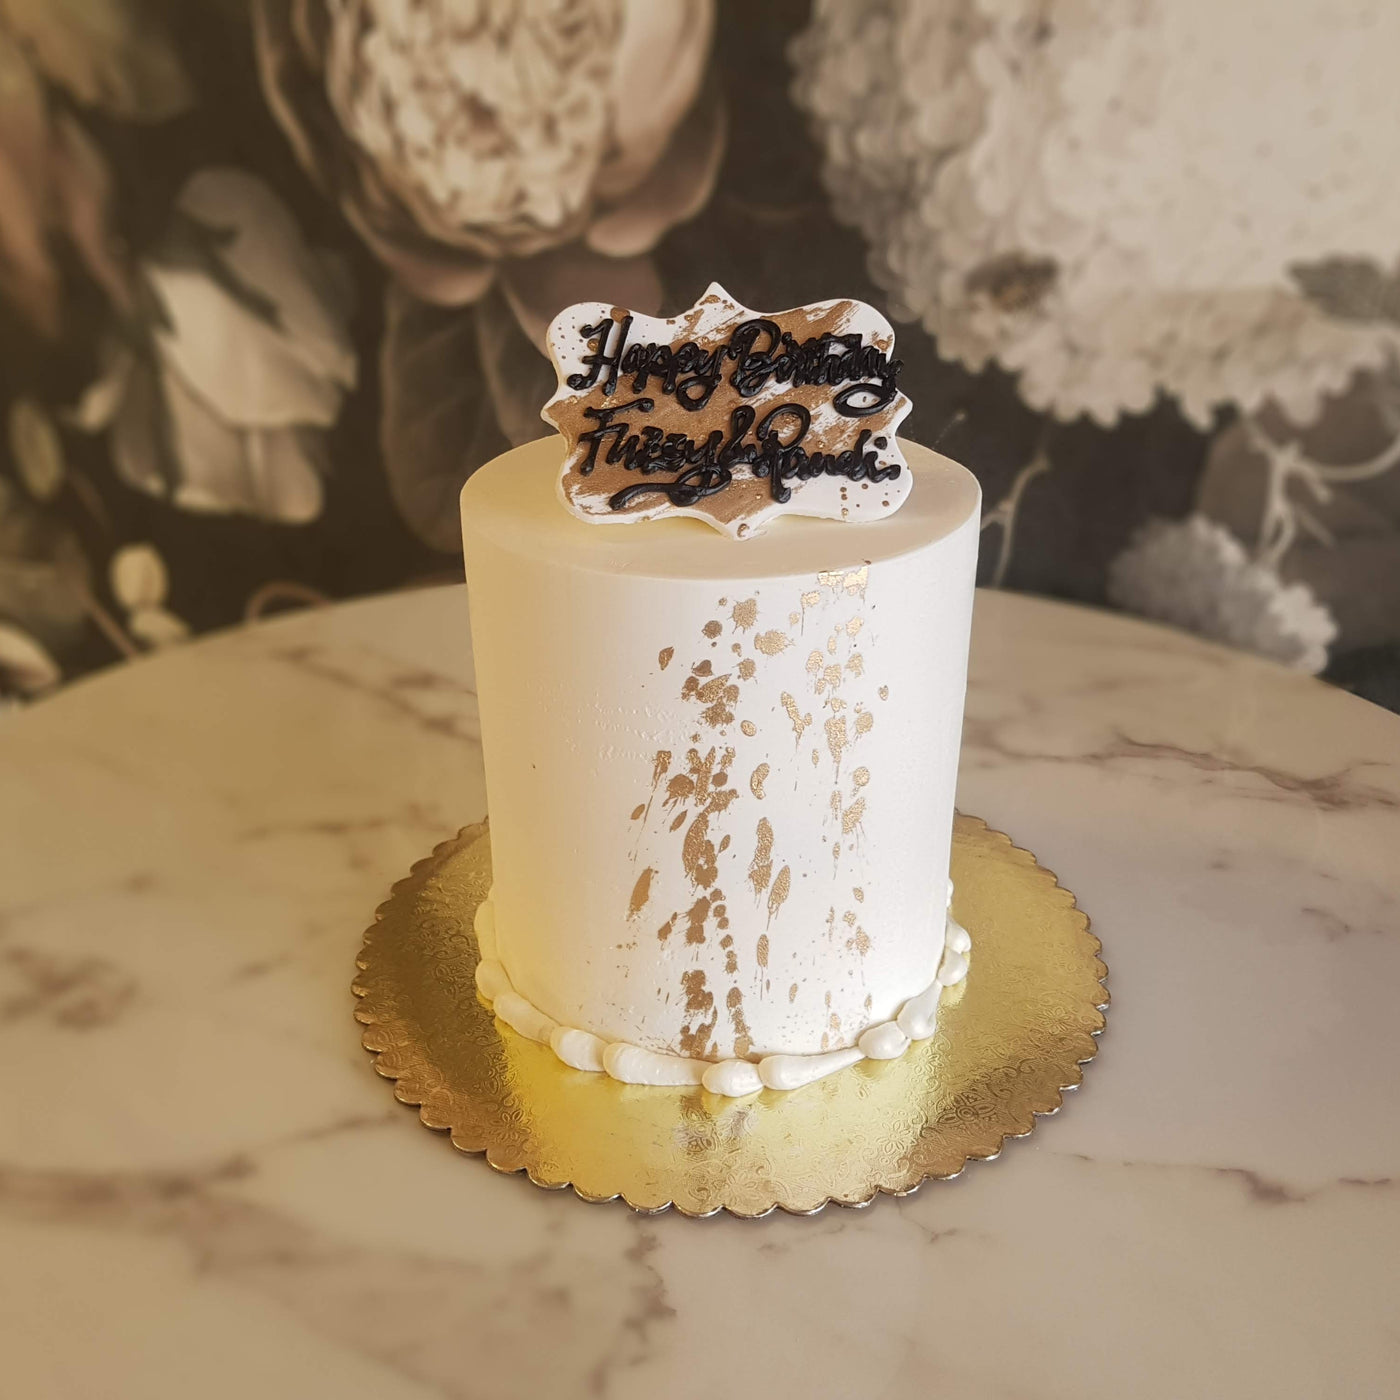  "Indulge in the opulence of our Gold Splash Cake – where every slice is a celebration of luxury and decadence! ✨🍰 #GoldenIndulgence #CakePerfection #CelebrationEssentials"